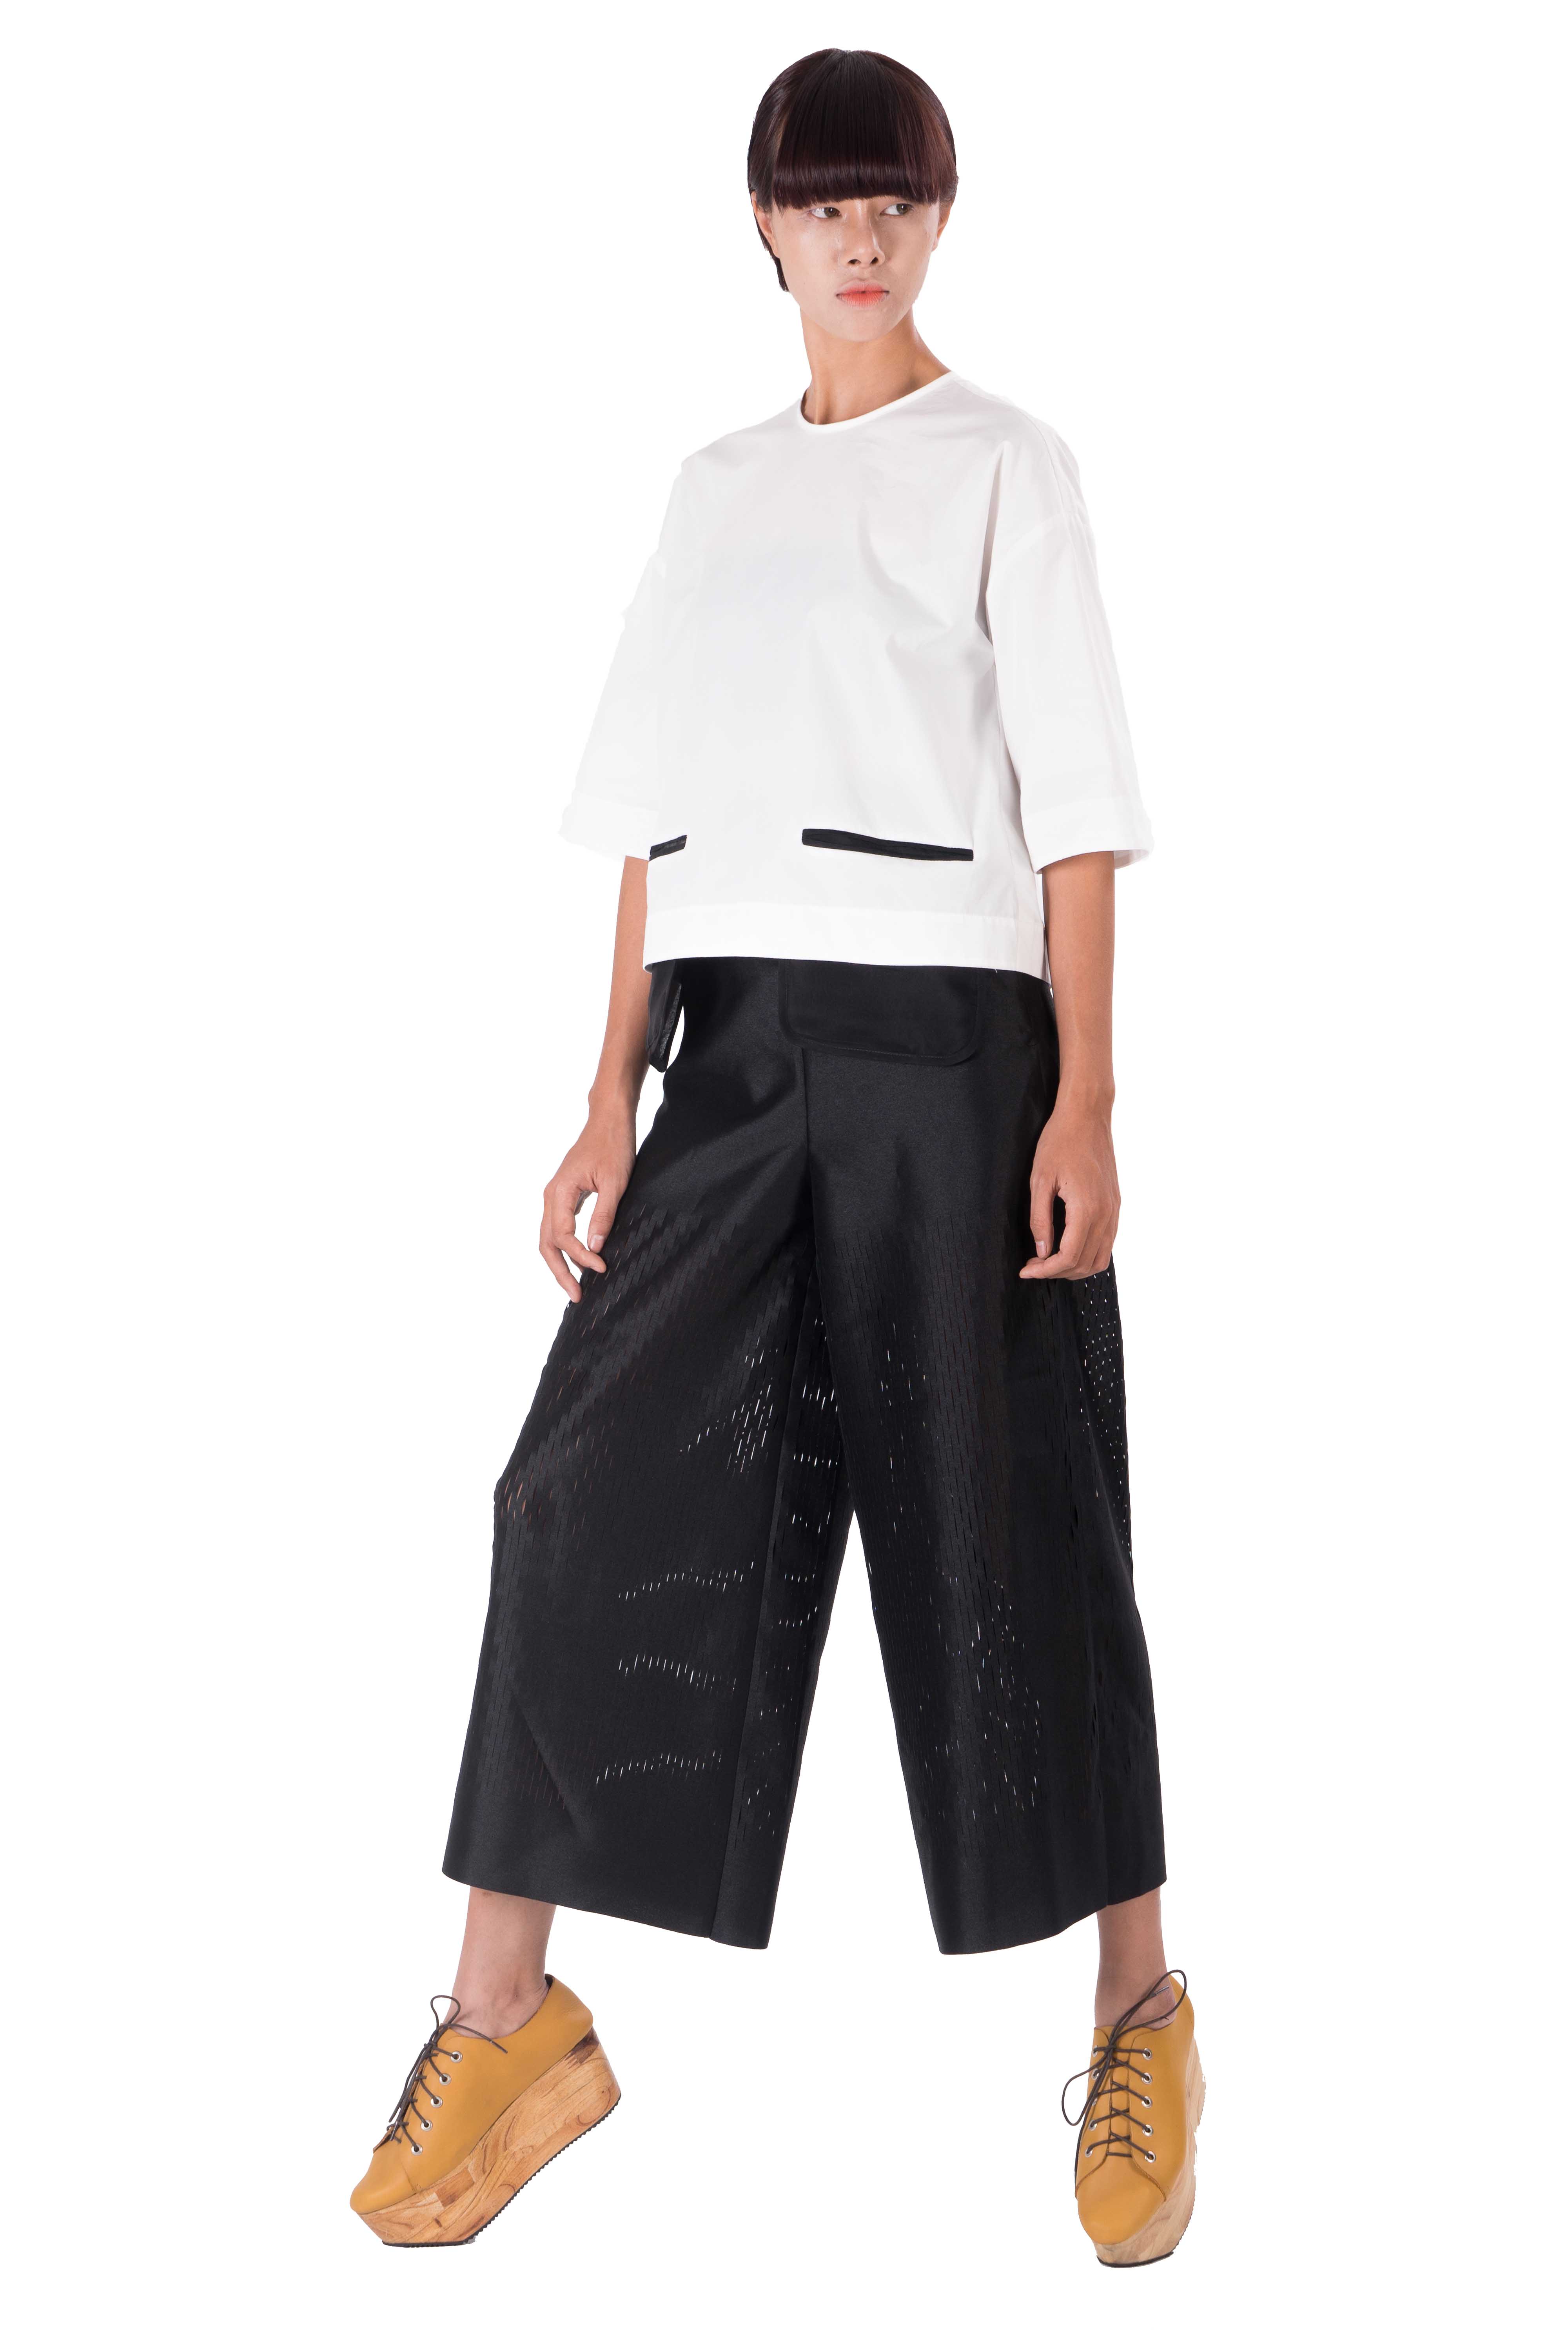  Taffeta culottes with laser cut out detailing starting below hips